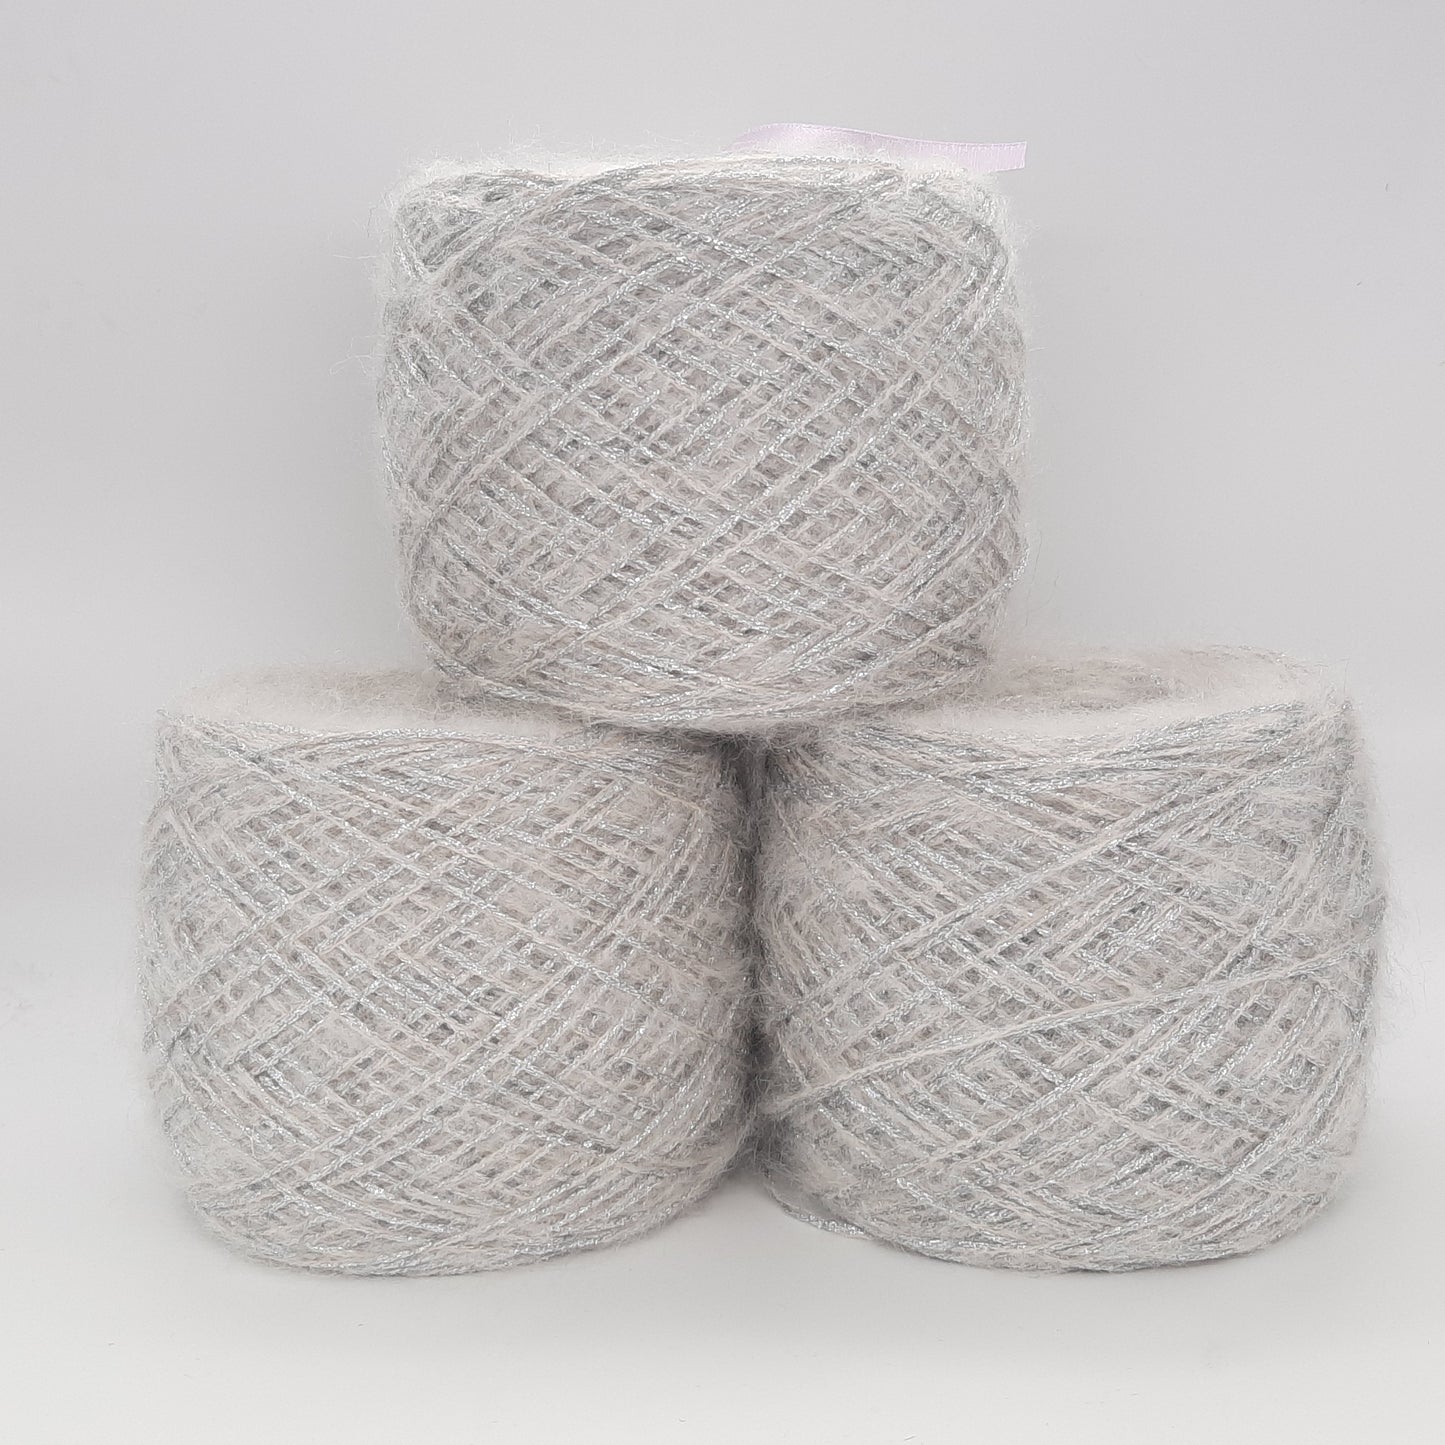 Brillo Mohair and Lurex / White and Silver 100gr